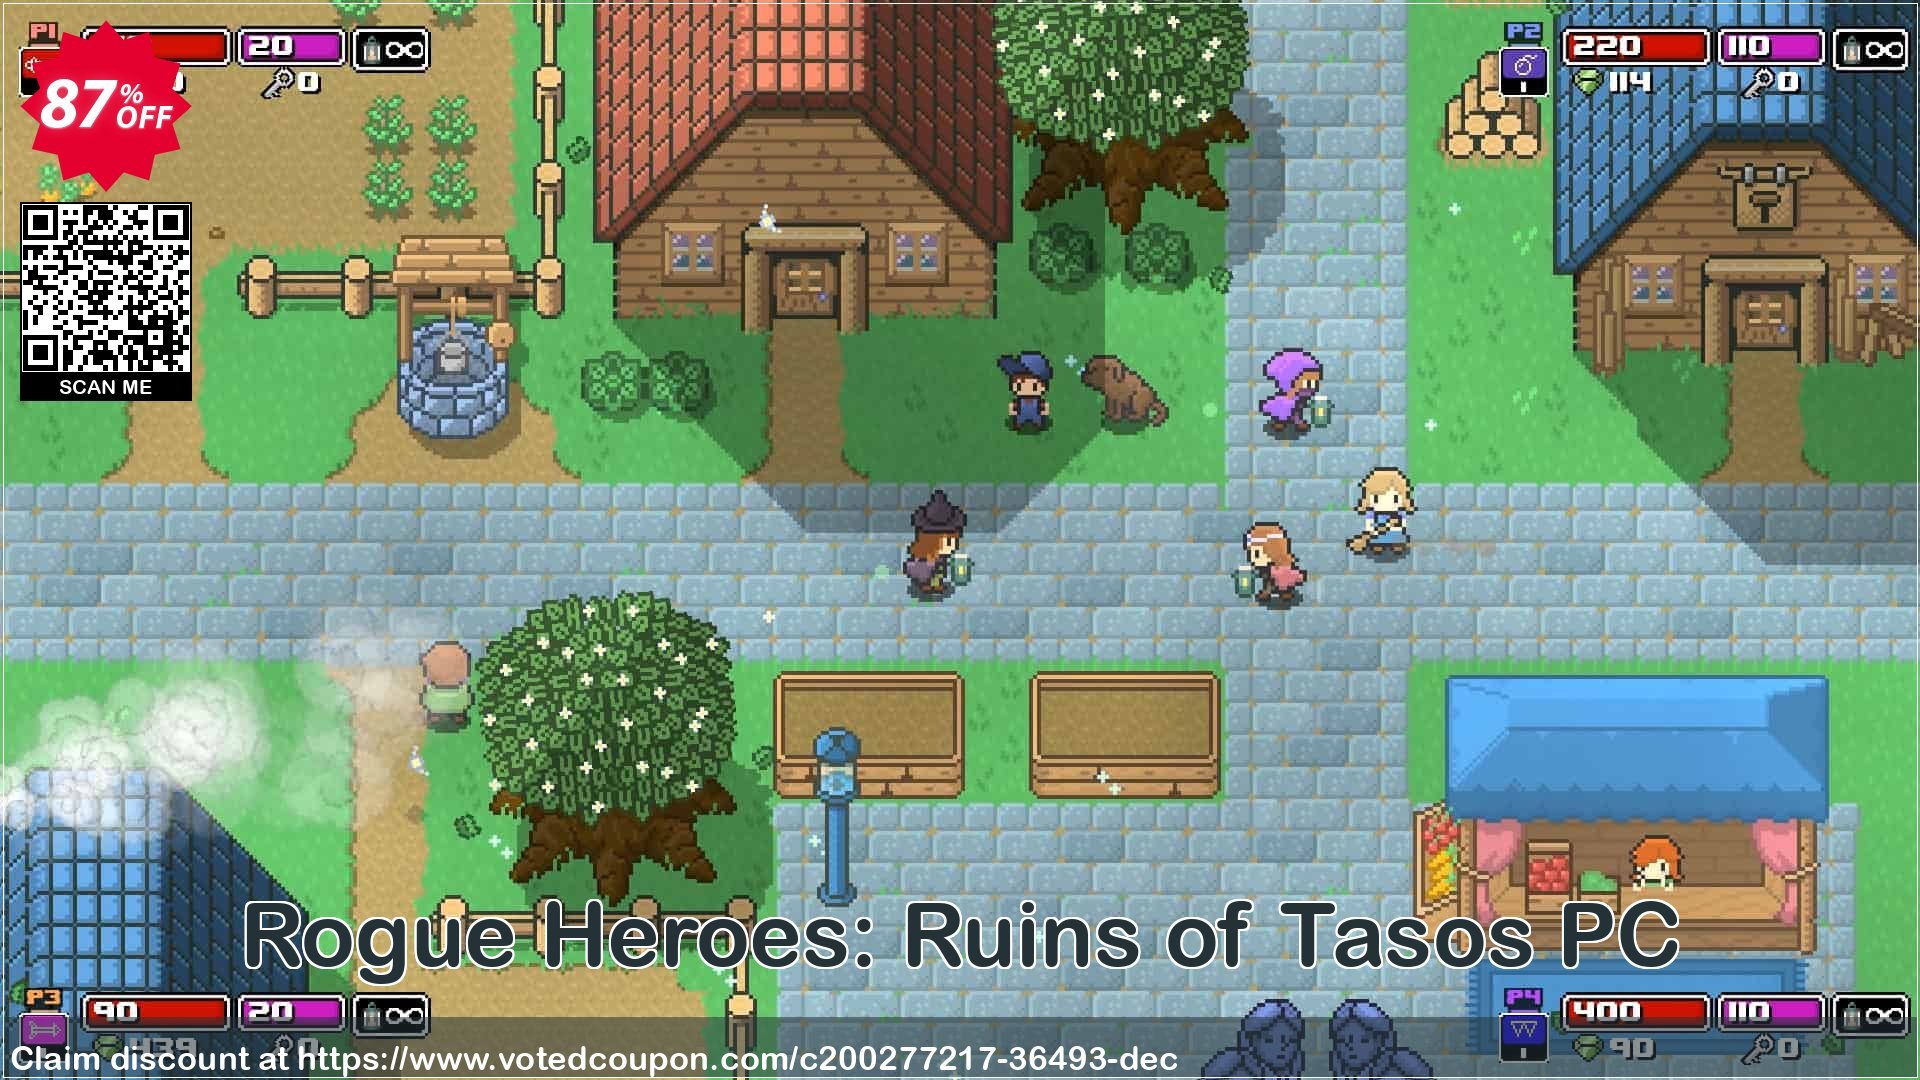 Rogue Heroes: Ruins of Tasos PC Coupon Code Apr 2024, 87% OFF - VotedCoupon